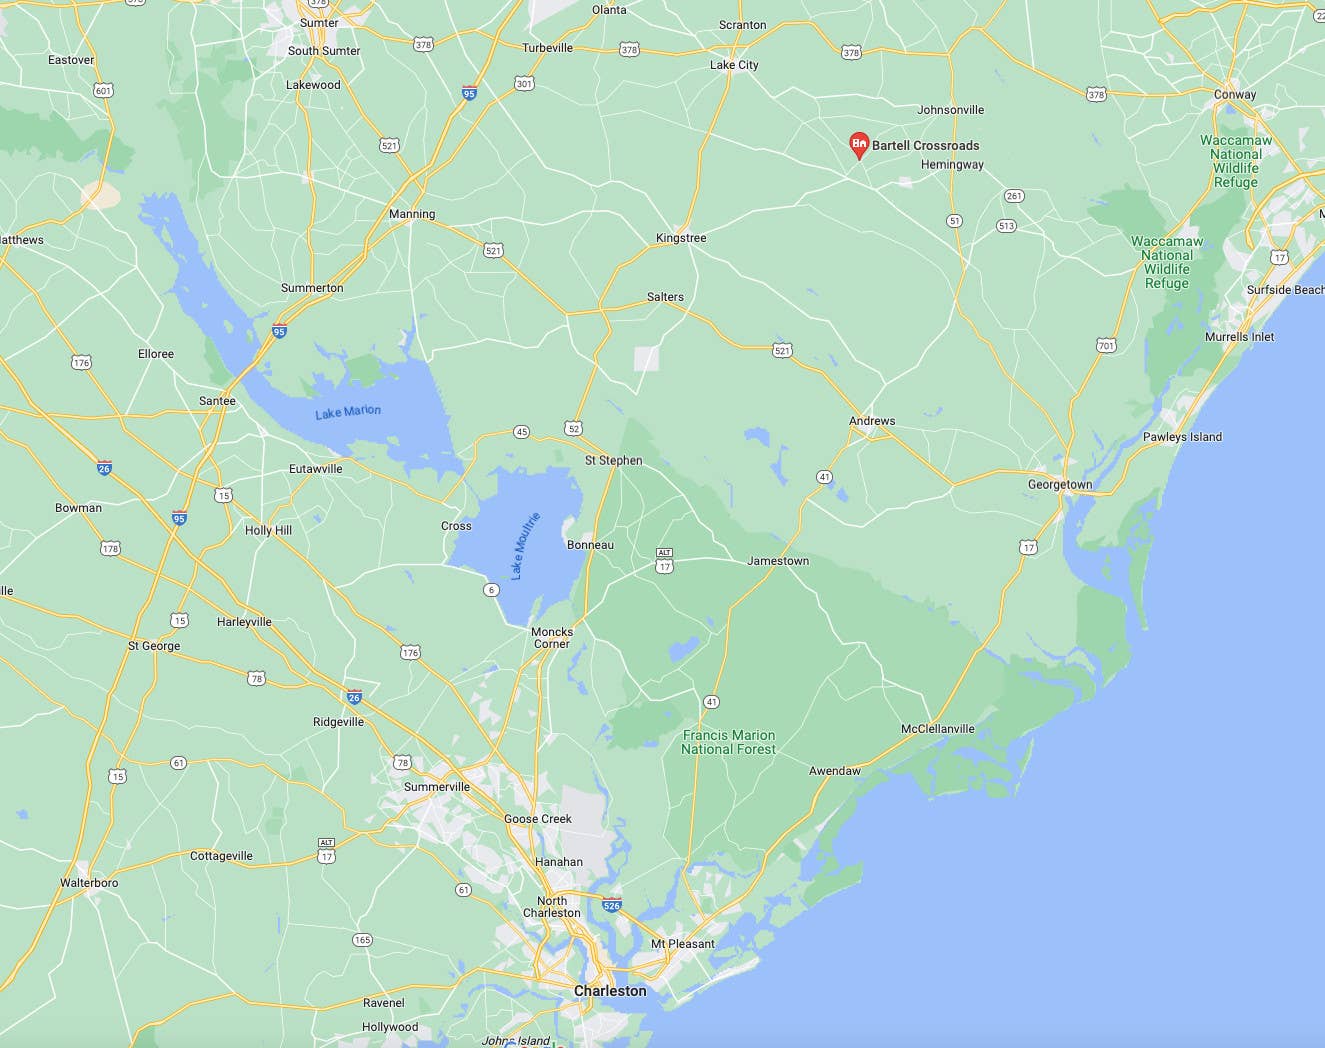 A map of South Carolina with North Charleston, where Charleston International Airport/Joint Base Charleston is located, to the south. Lake Moultrie and Lake Marion are seen to the northwest. Bartell Crossroads, the area where the debris field was subsequently located, is seen marked to the northwest. <em>Google Maps</em>